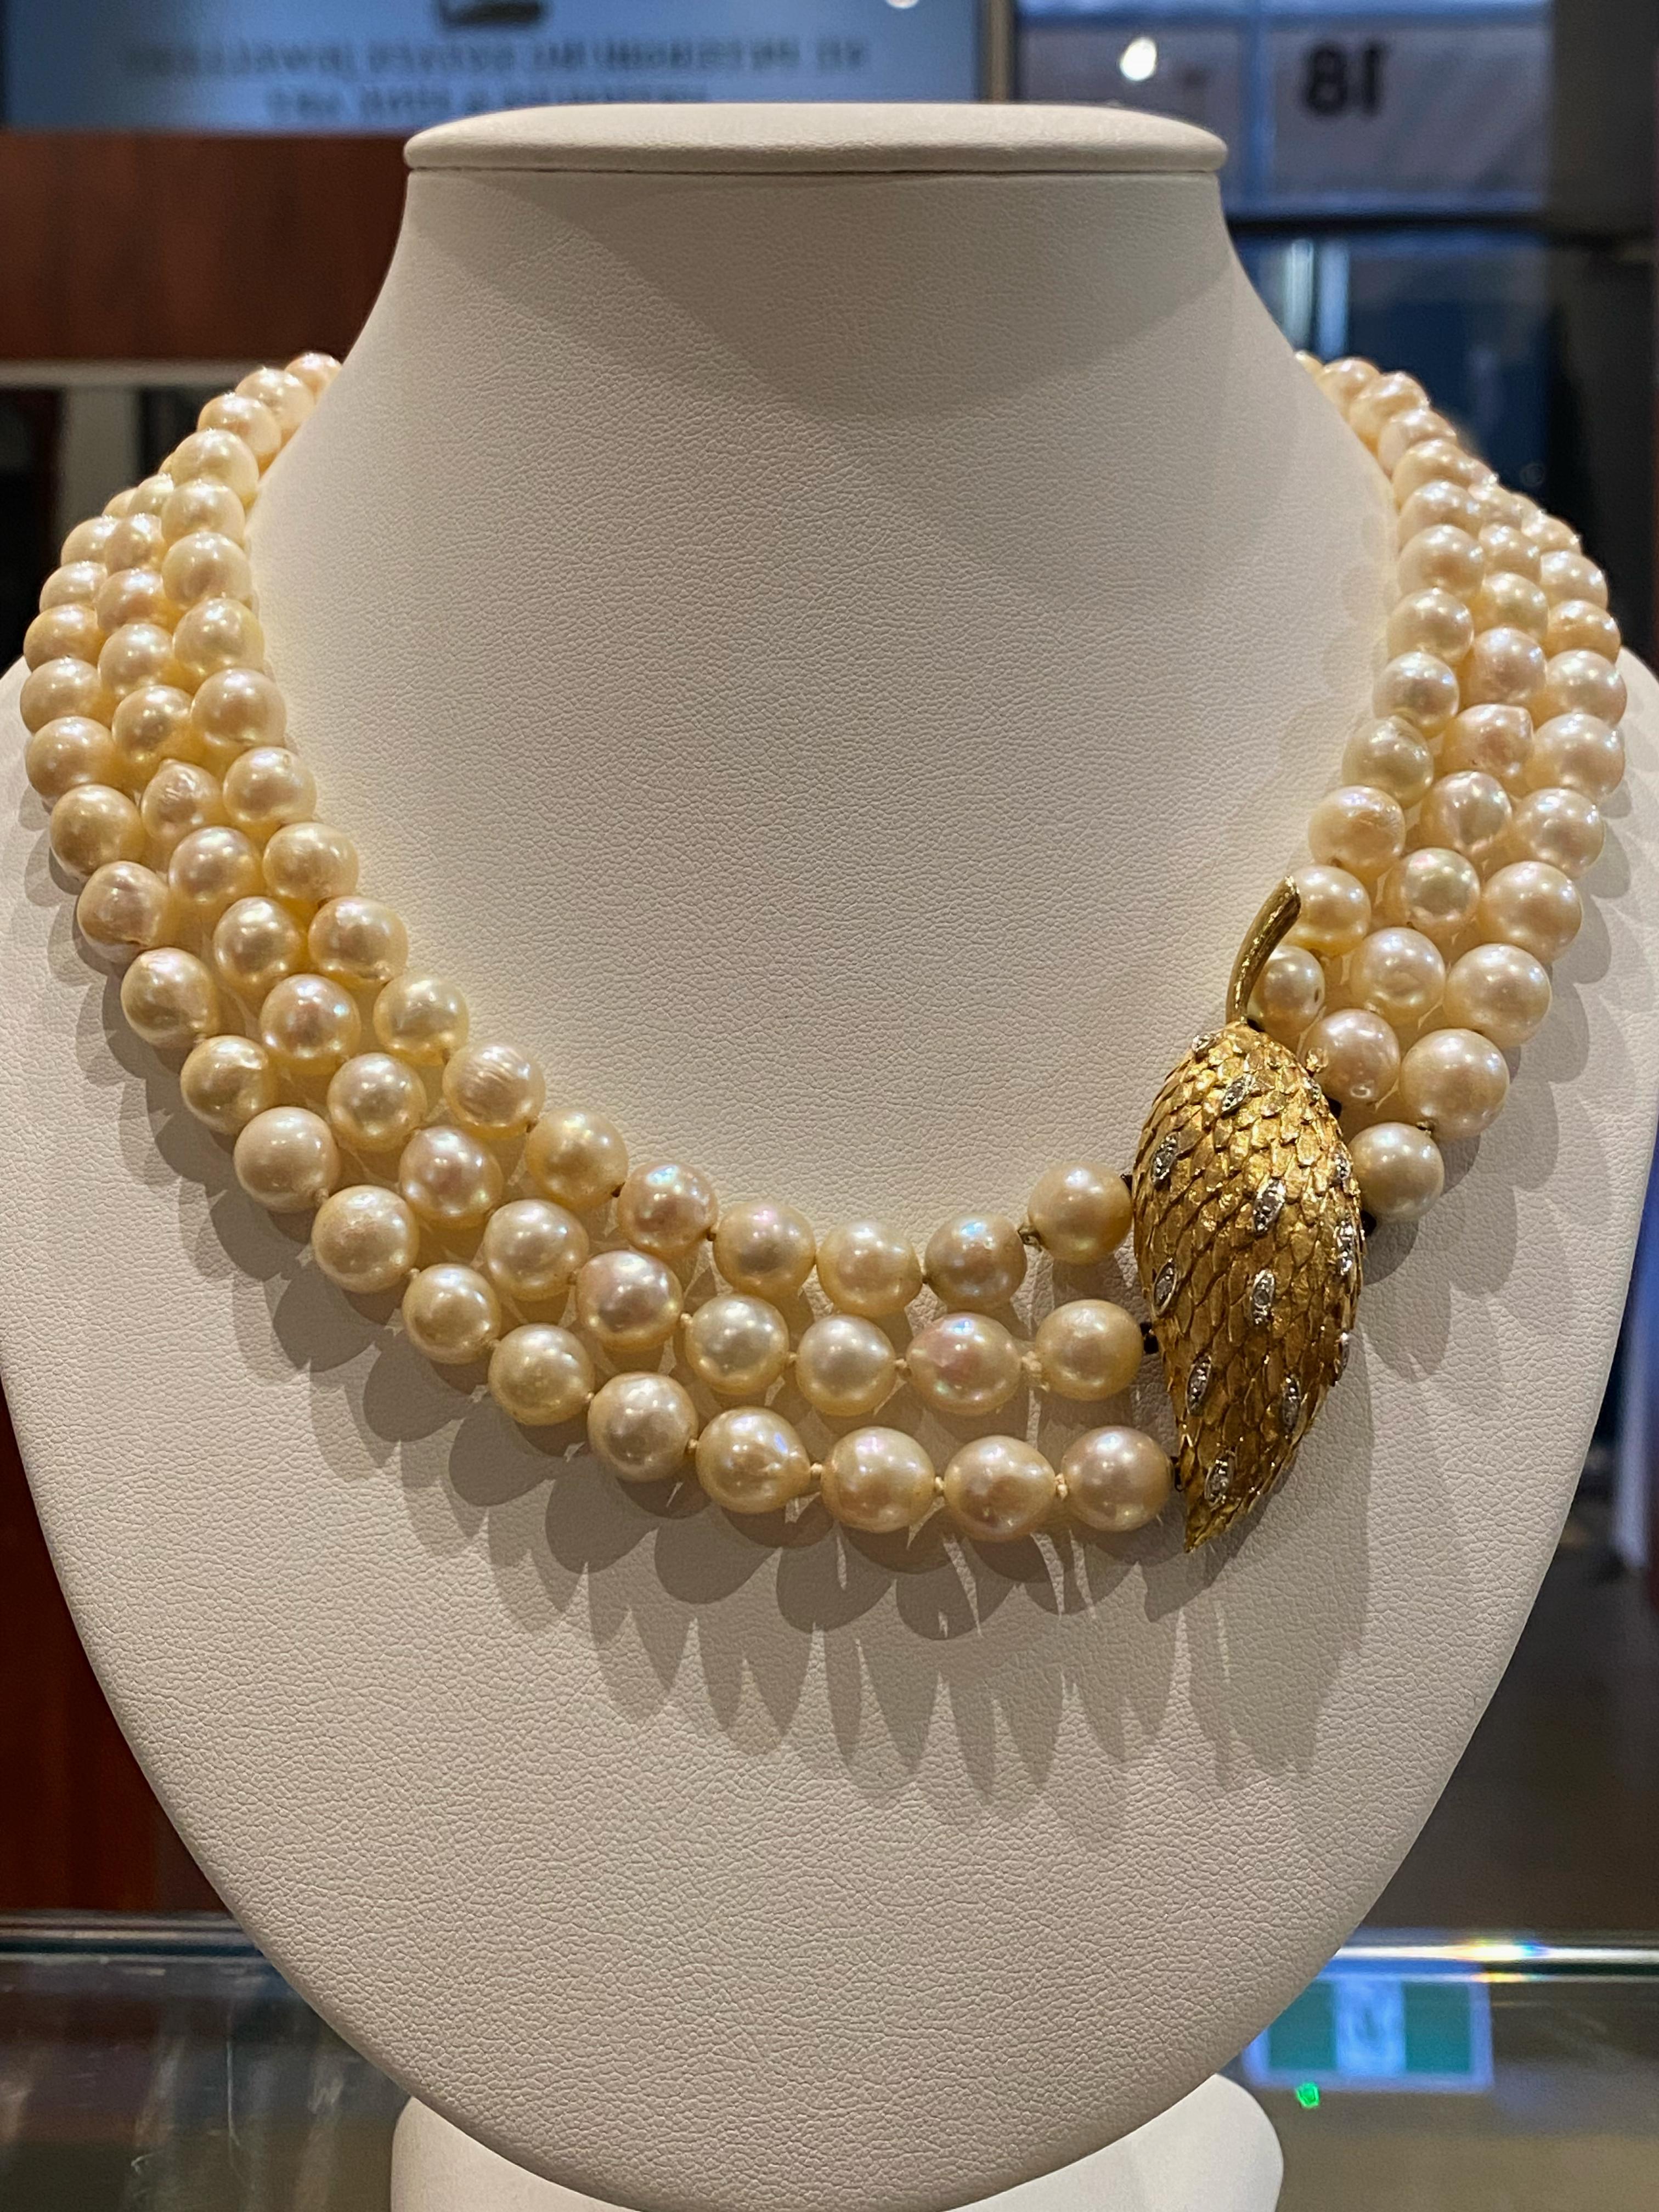 Bead Magnificent Three-Strand Pearl Necklace (Elizabeth II Style) Gold Diamond Clasp